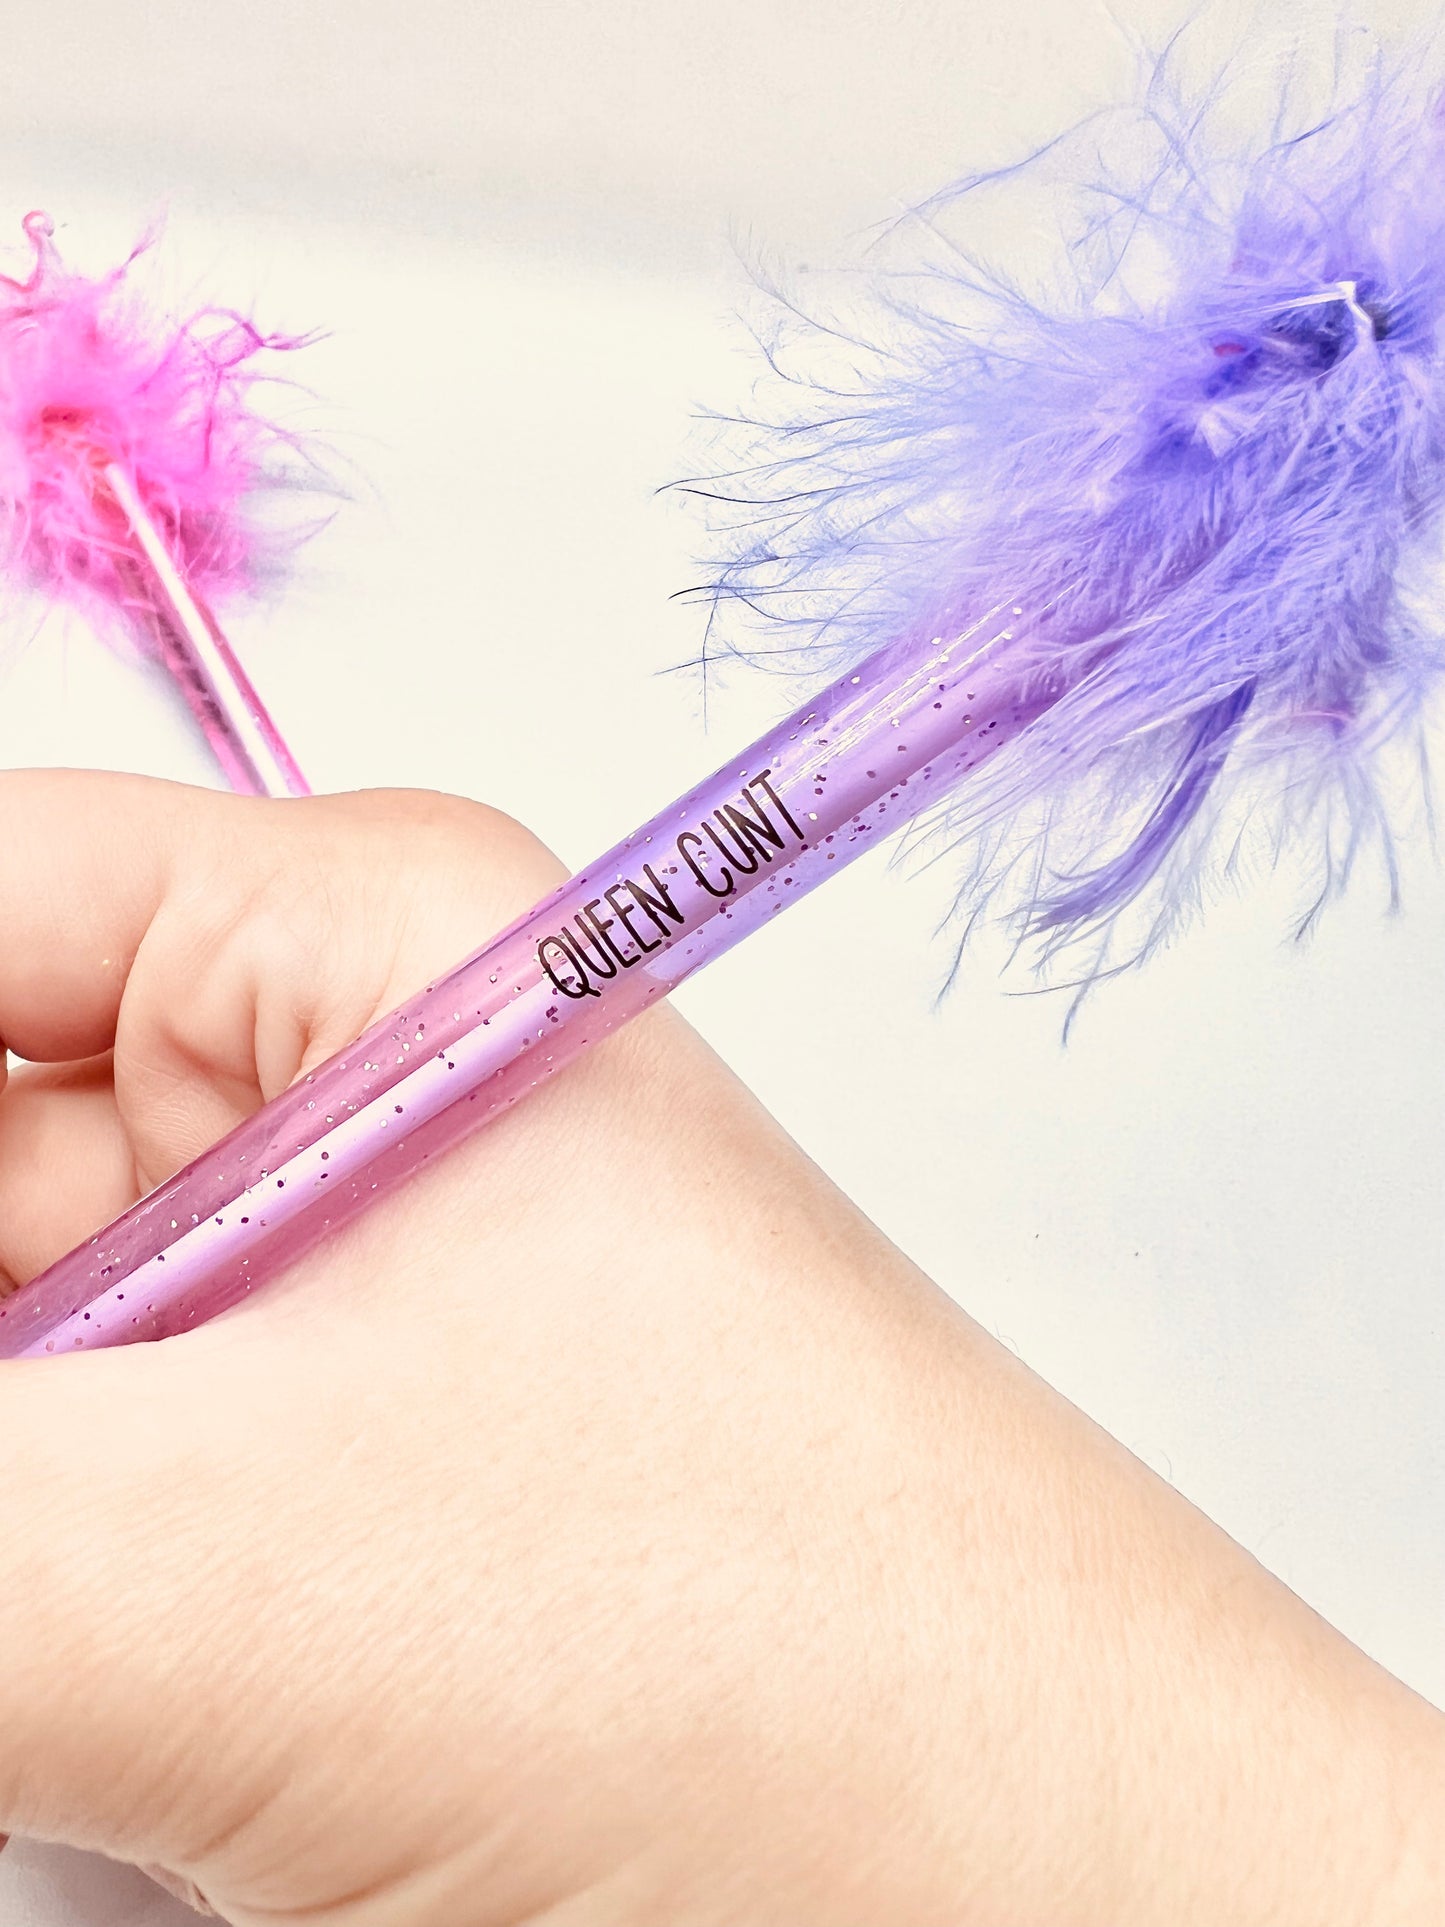 2 pack pens, pink and purple. Pink pen says 'cute but fucking vulgar' the purple says 'queen cunt'. Both pens have a glittery base, fluffy top and a plastic crown topper. Blue ink